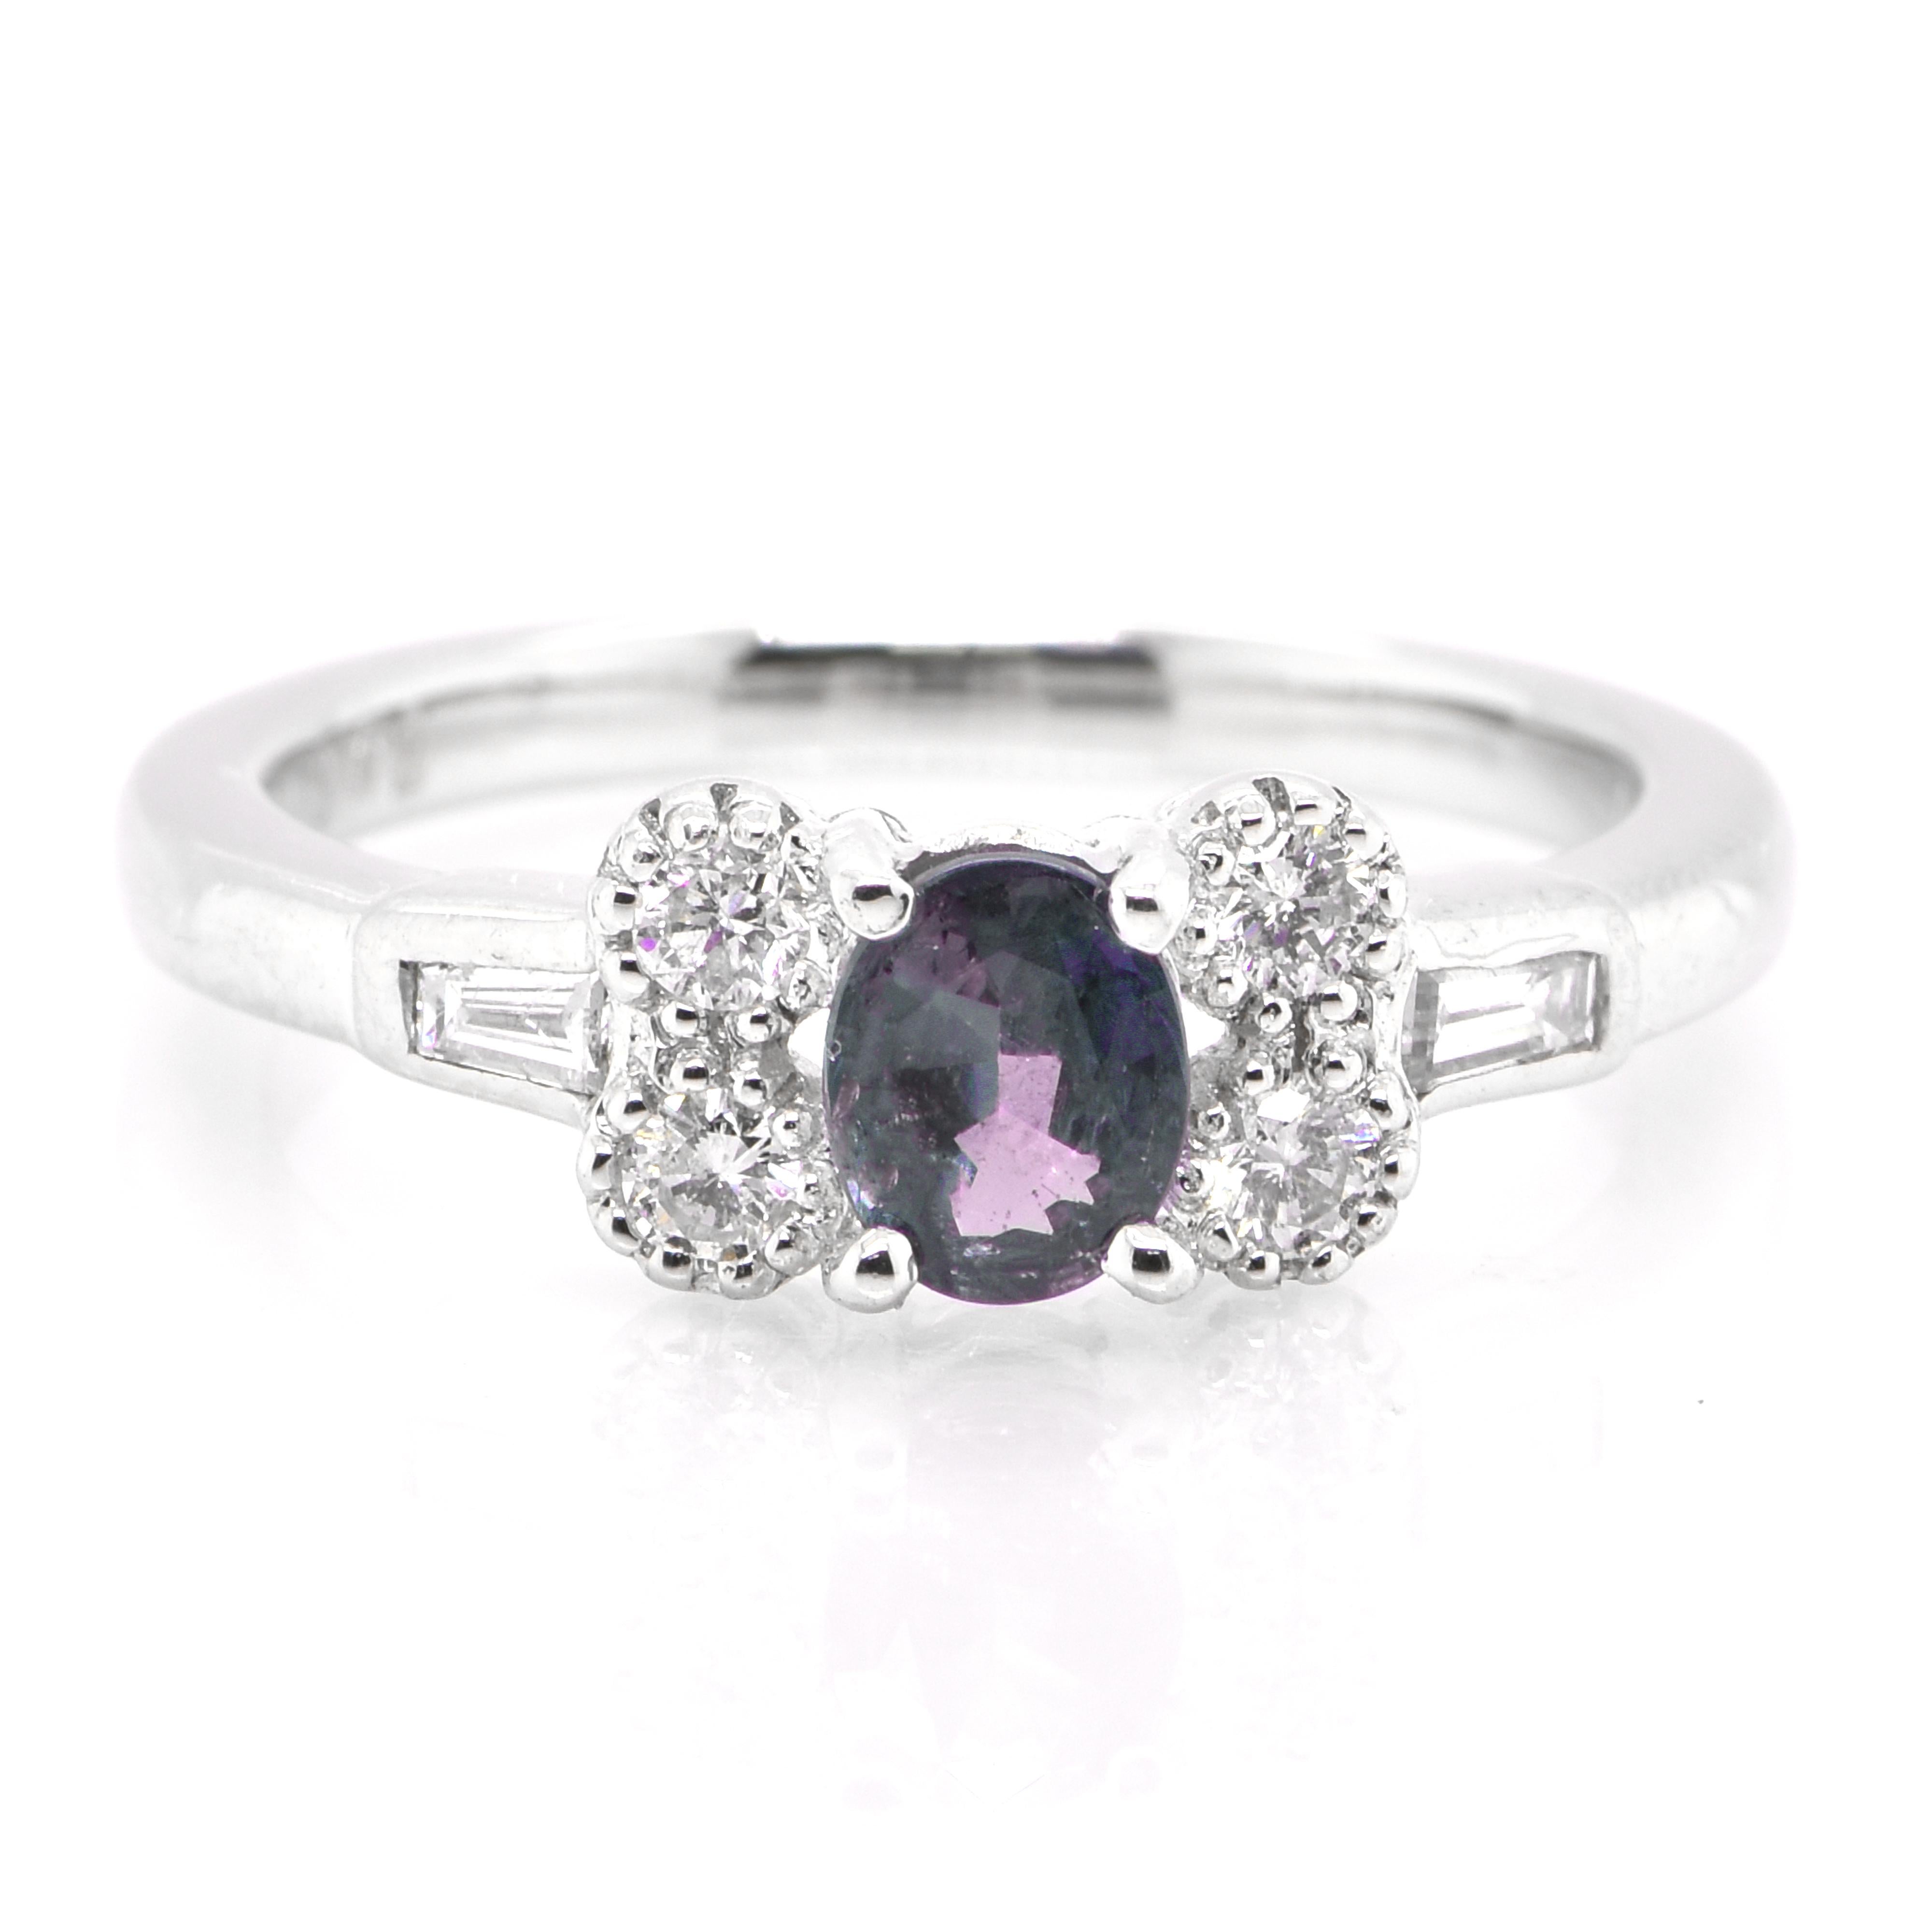 A gorgeous ring featuring a 0.42 Carat, Natural Alexandrite and 0.30 Carats of Diamond Accents set in Platinum. Alexandrites produce a natural color-change phenomenon as they exhibit a Bluish Green Color under Fluorescent Light whereas a Purplish